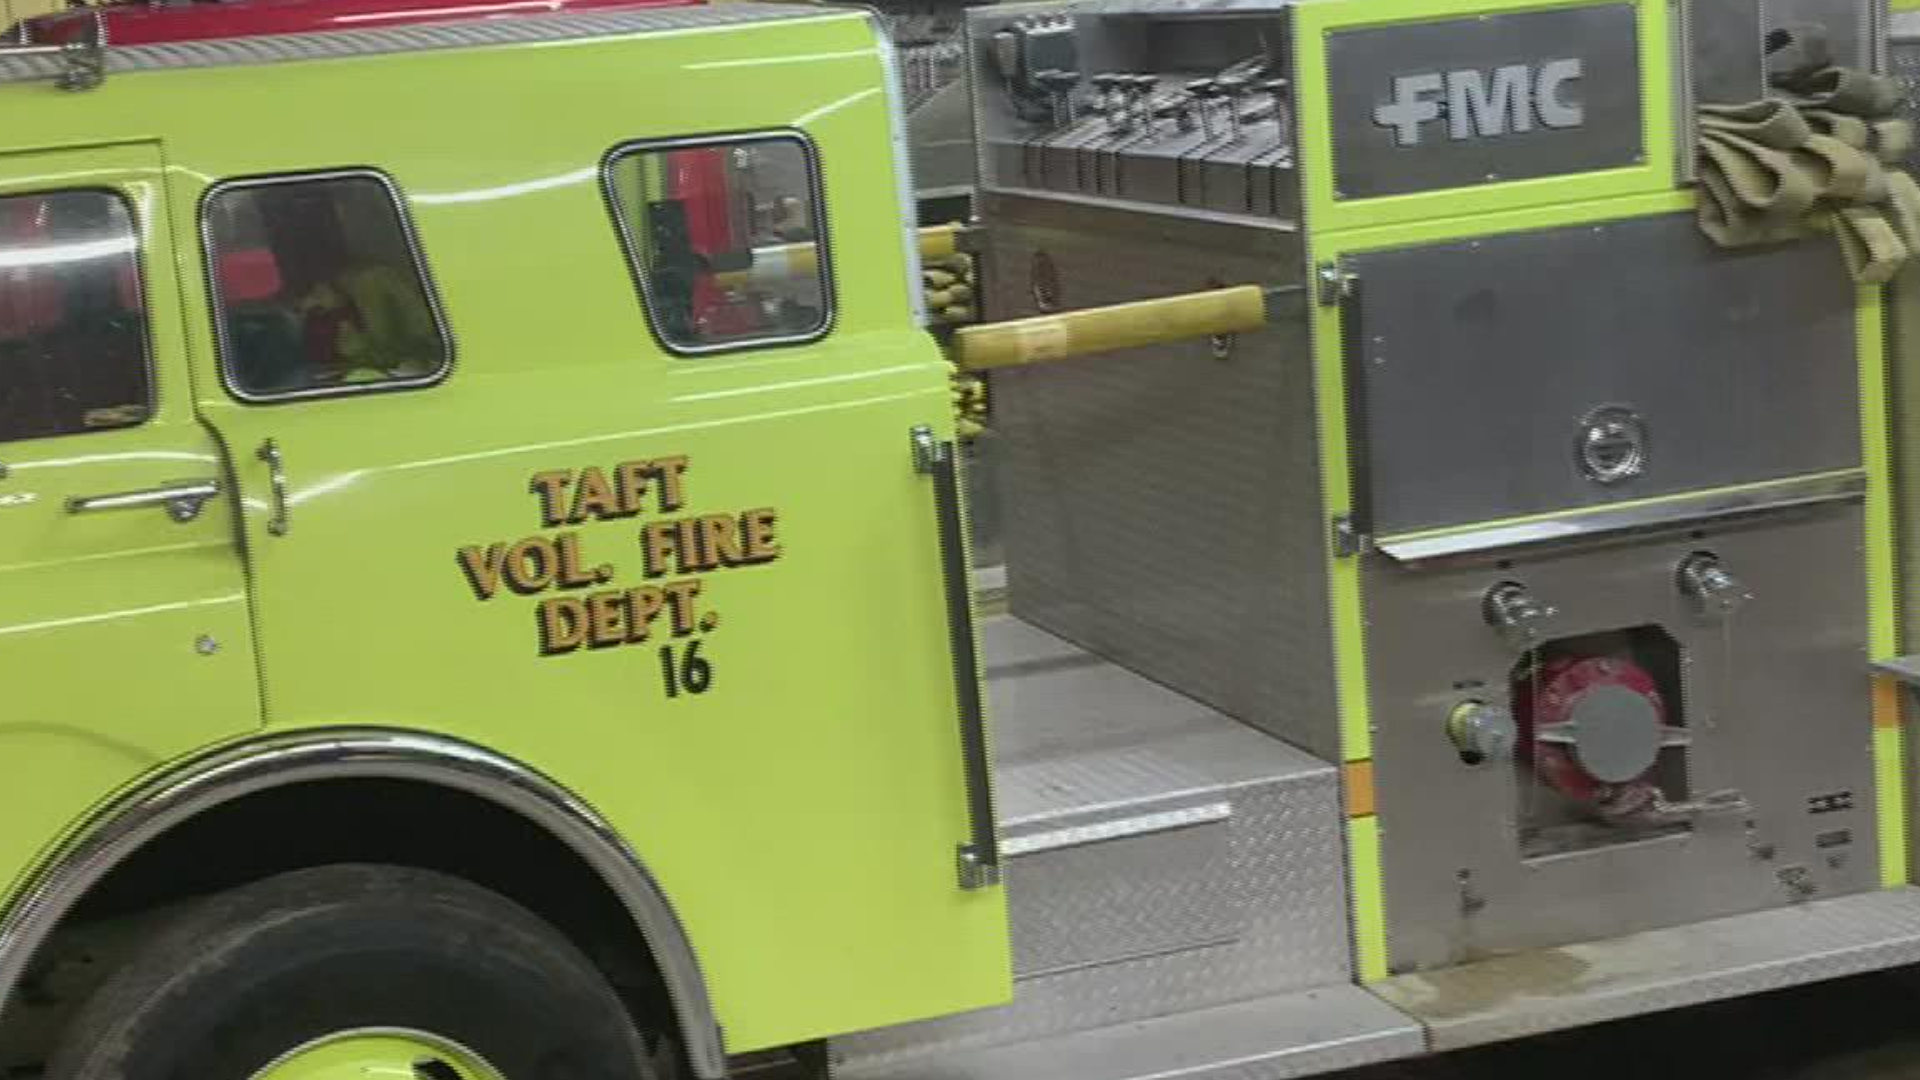 The issue and concerns at hand revolve around funds for the fire department.